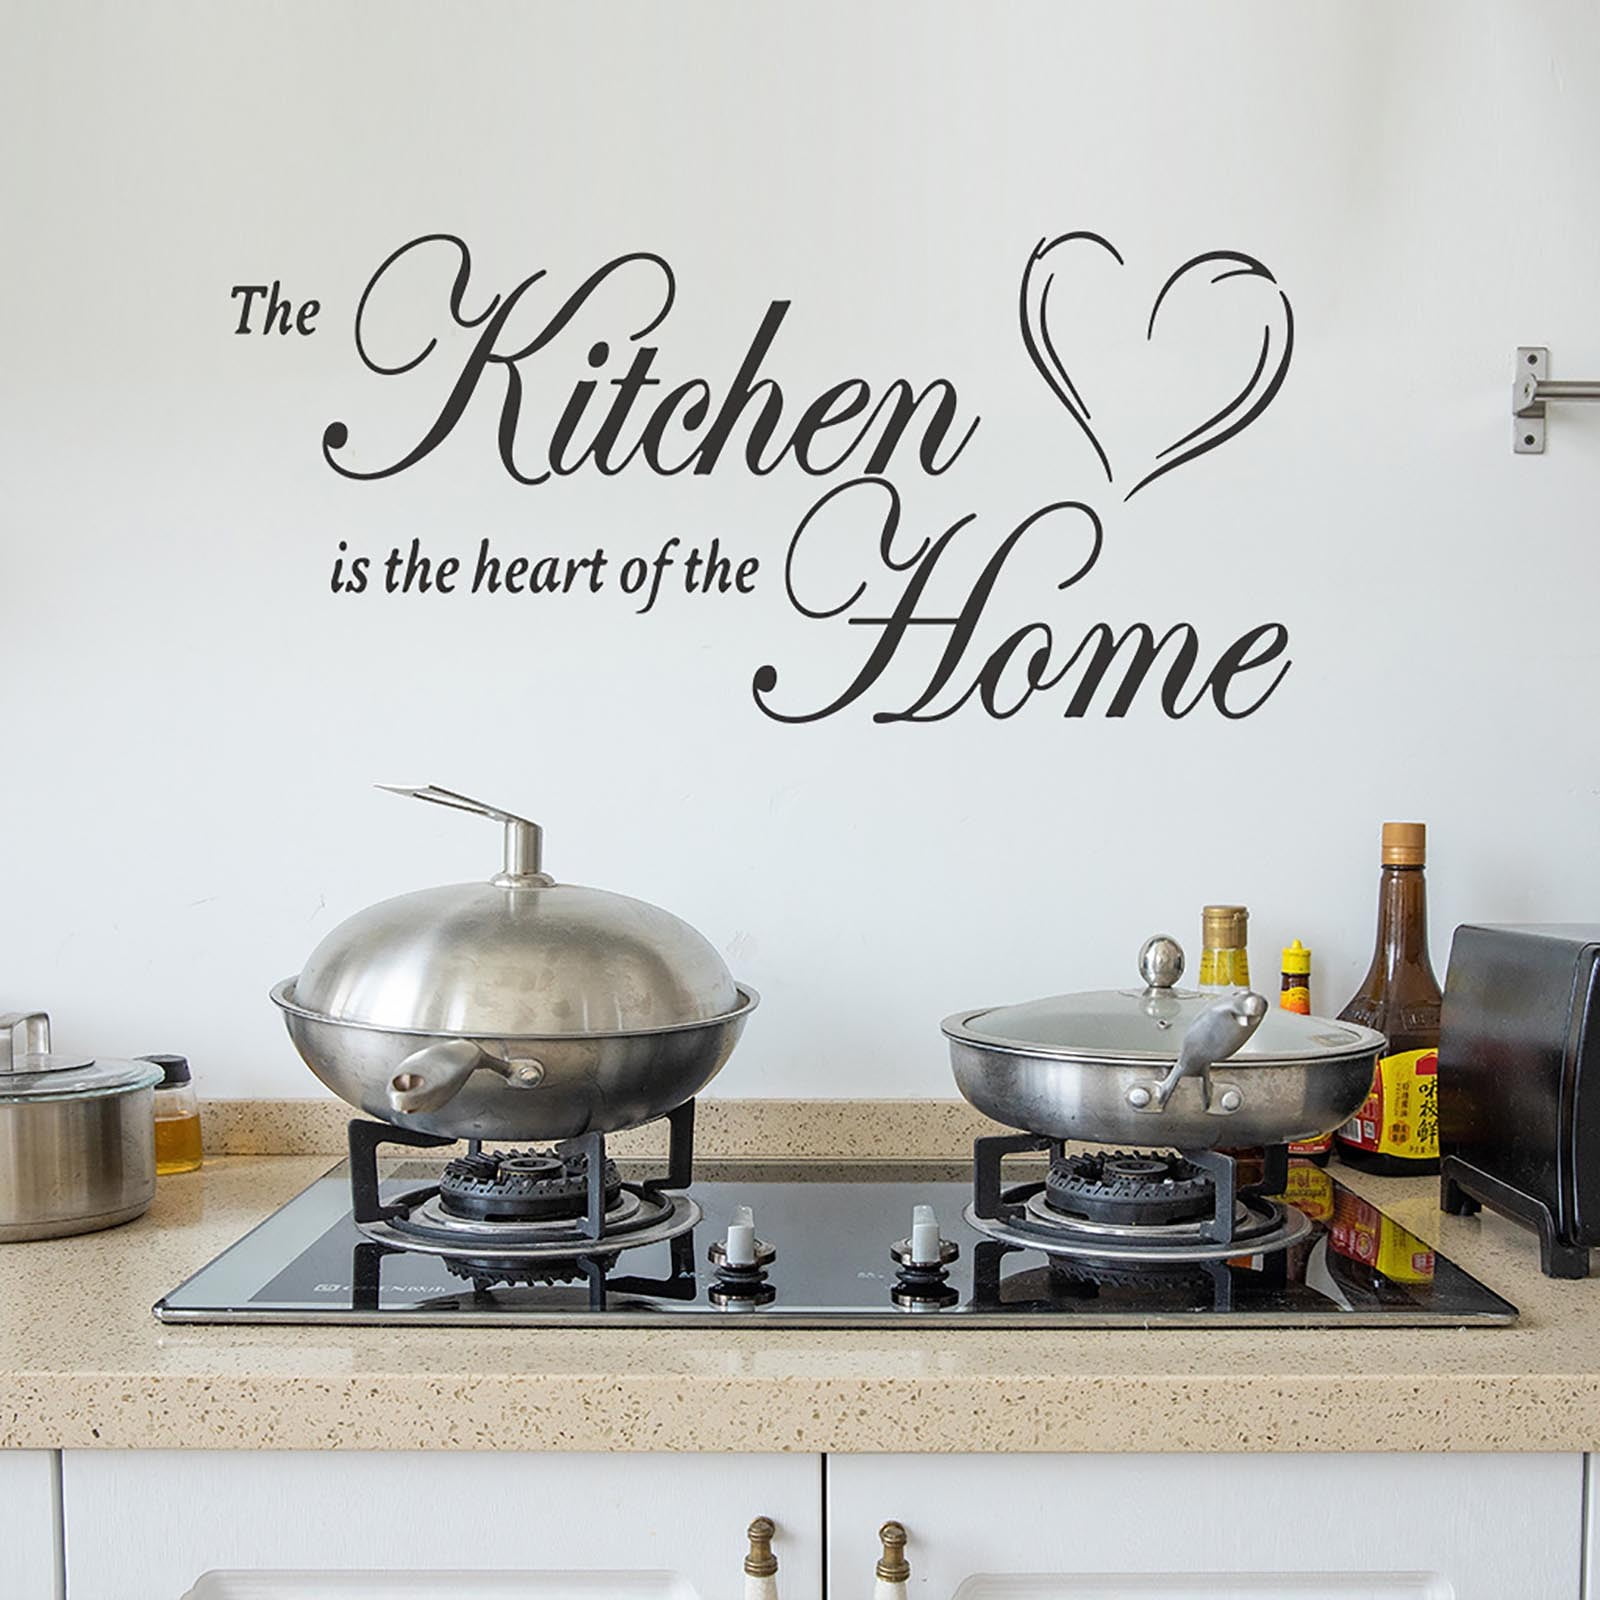 Wall Stickers Quotes The Kitchen Is A Heart Of The Home Art Decal Removable DIY